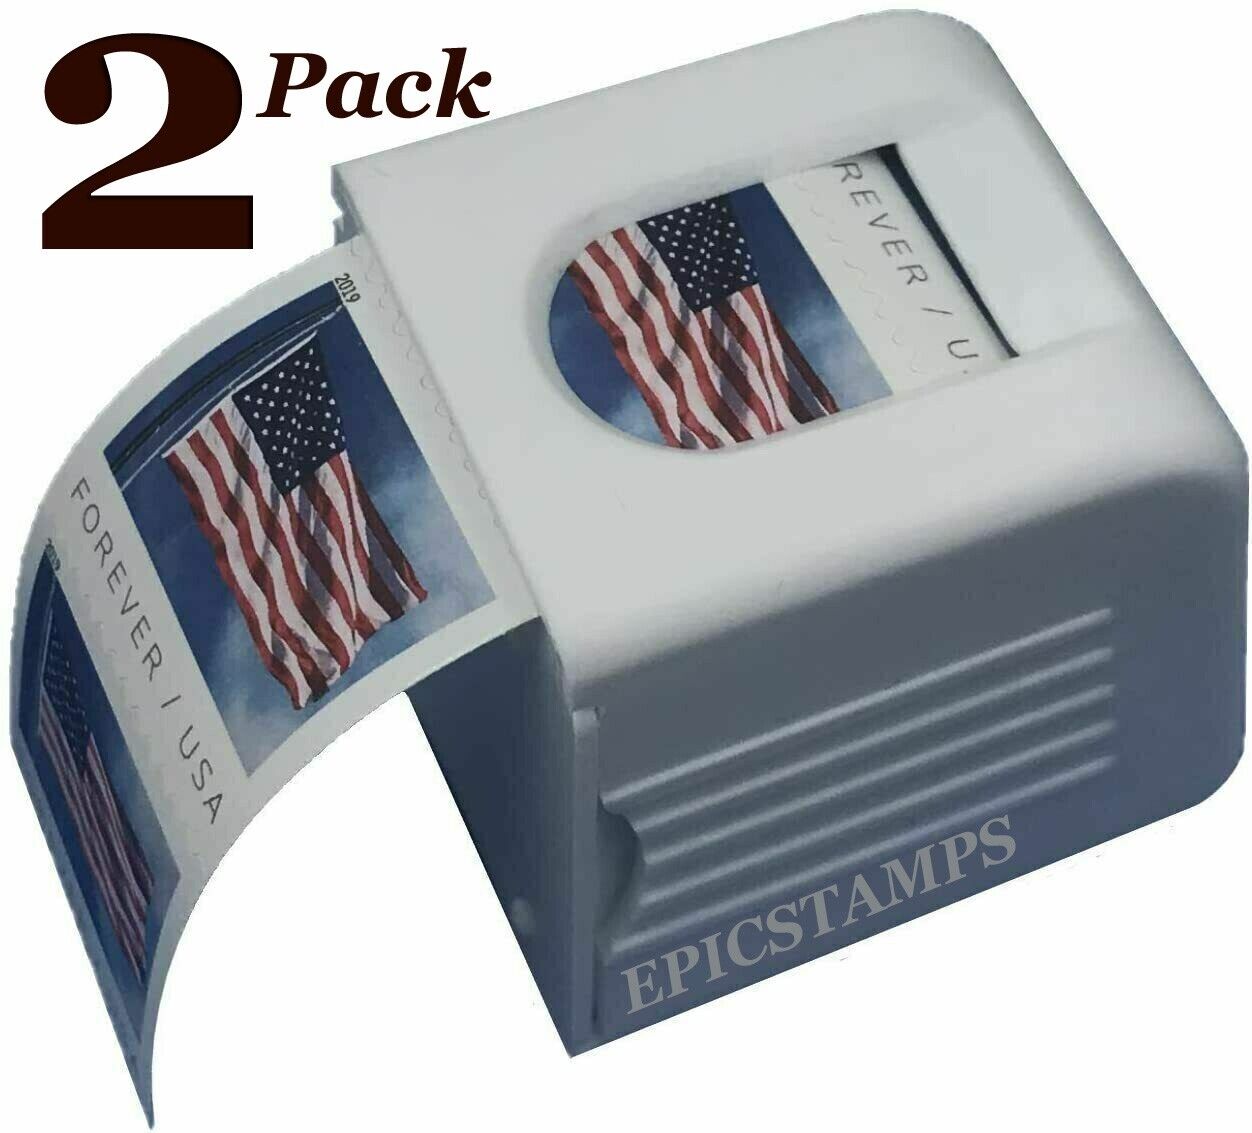 2-PACK Stamp Dispenser fits for a roll coil Forever Stamps (Stamps not included)